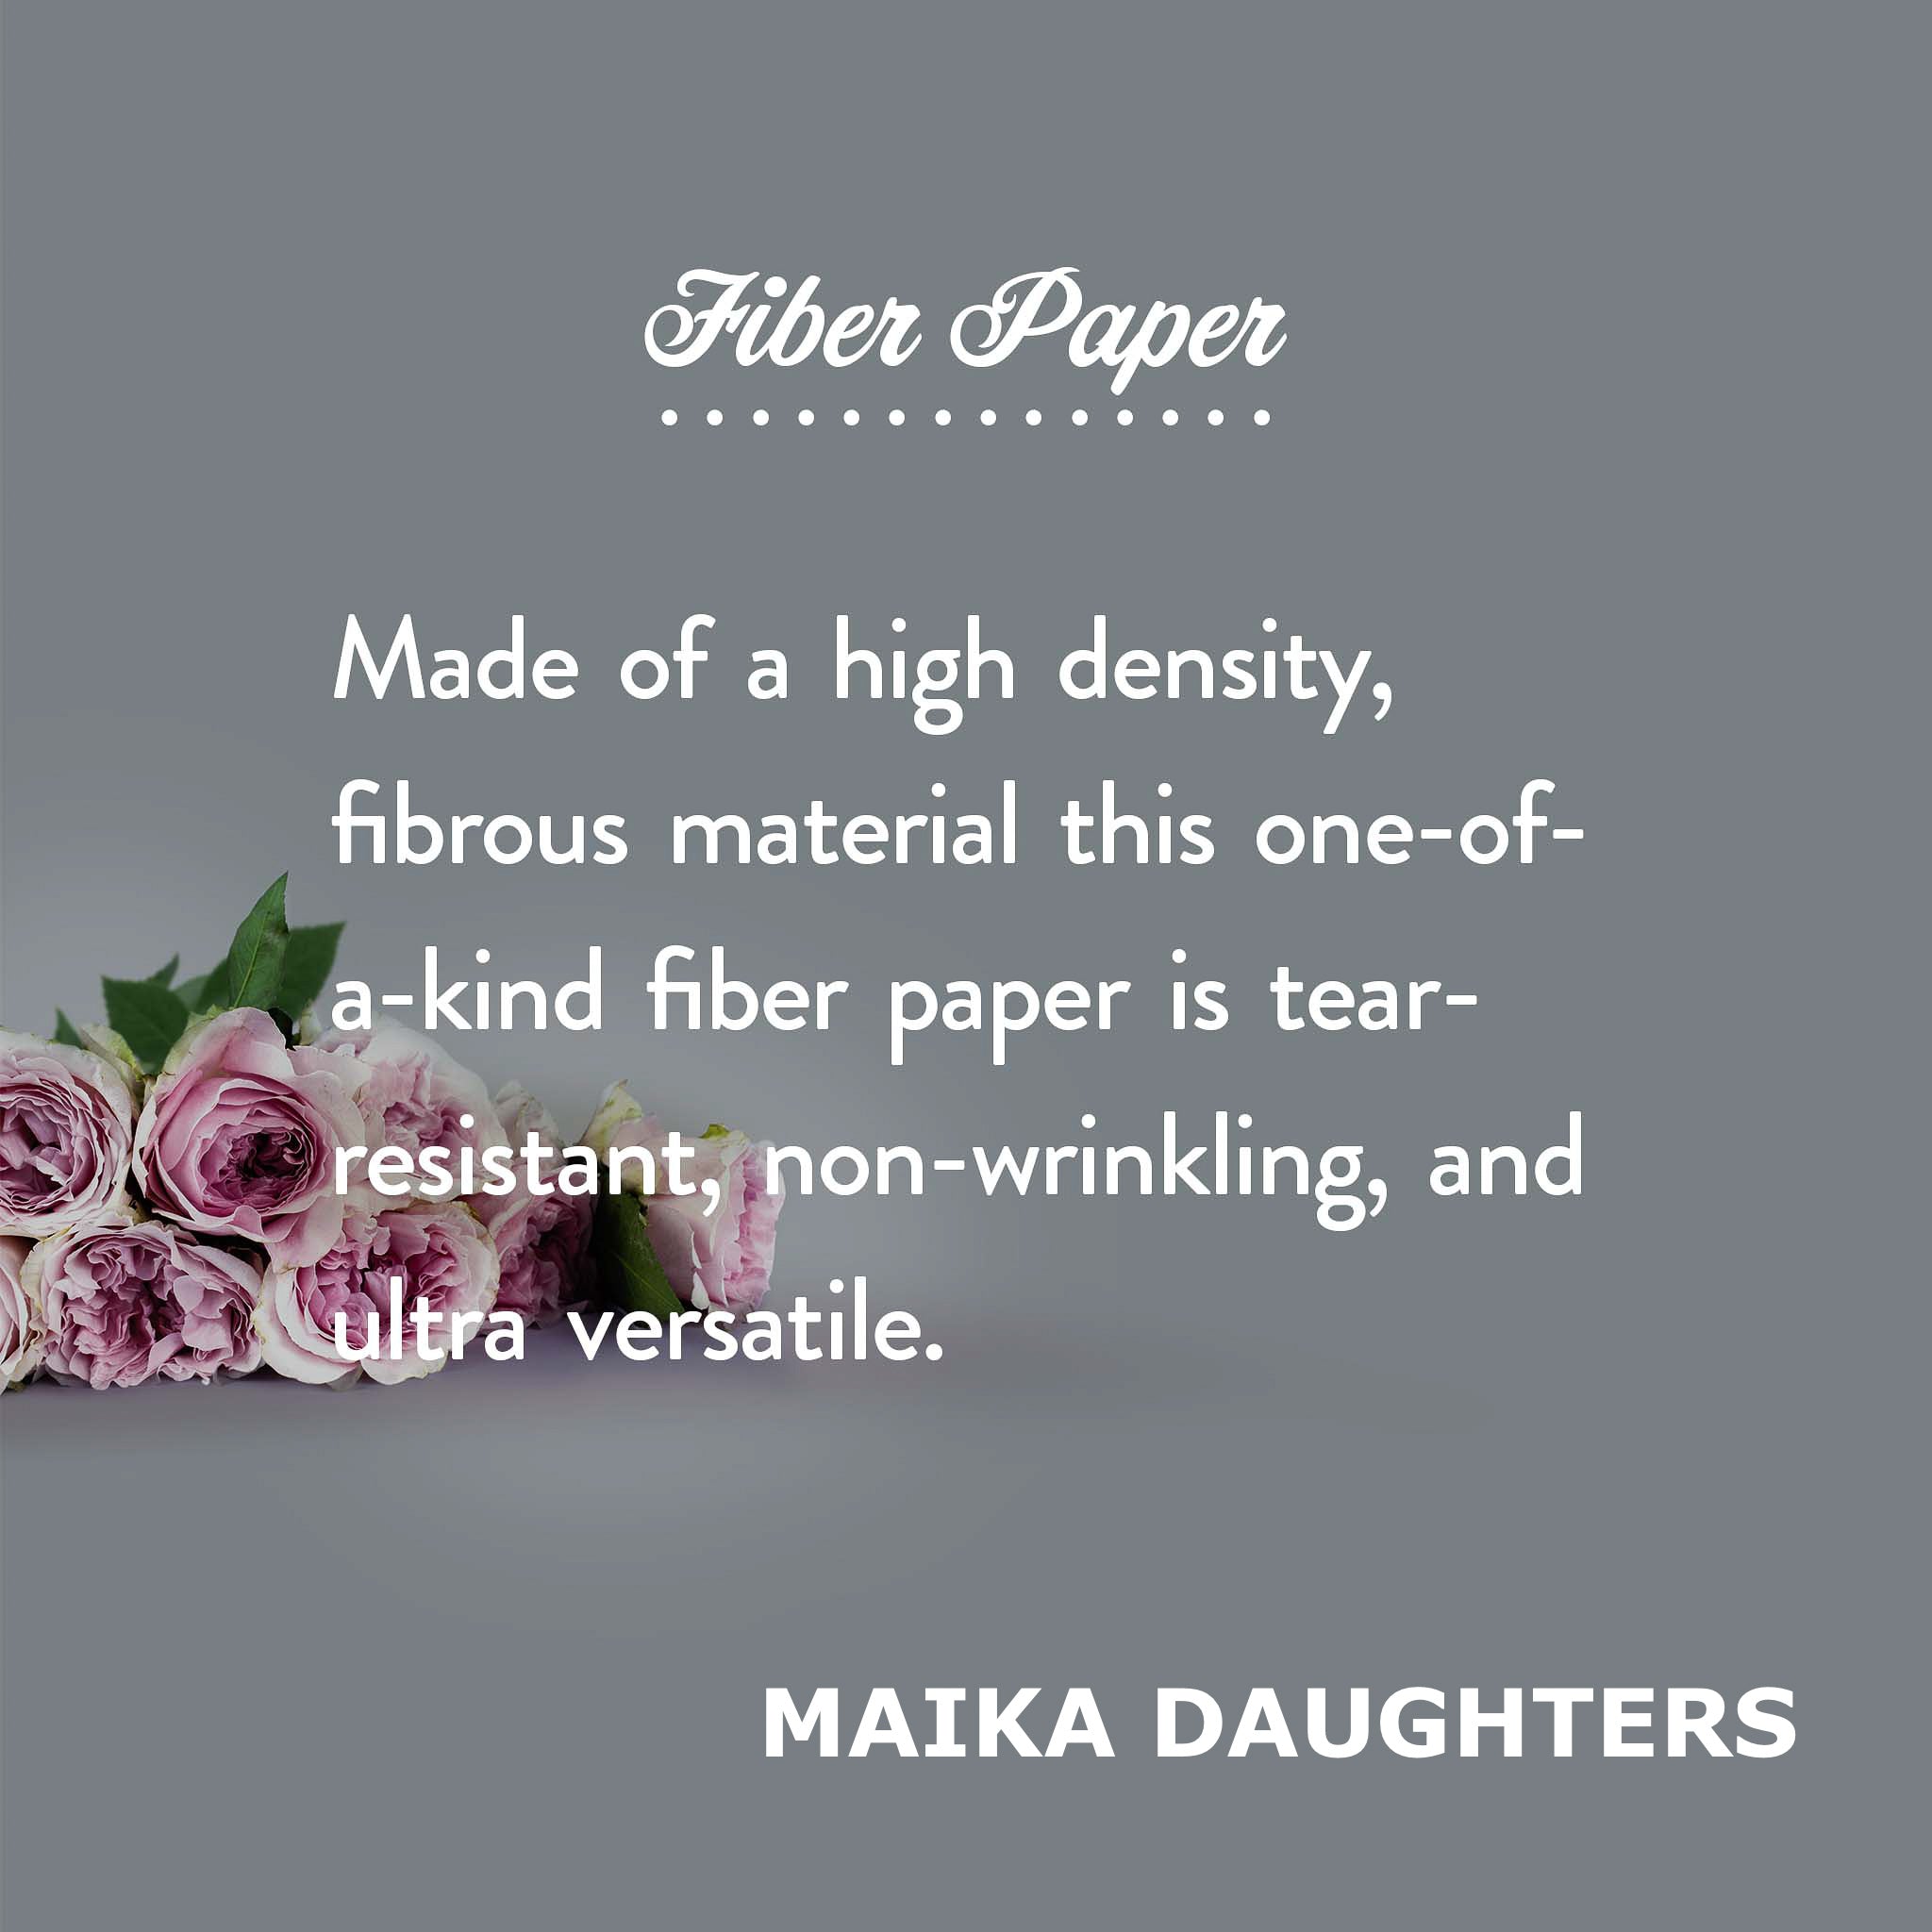 A gray background with a bouquet of roses. White text is shown reading: Fiber paper. Made of a high density, fibrous material this one-of-a-kind fiber paper is tear-resistant, non-wrinkling, and ultra versatile. Maikadaughters.com